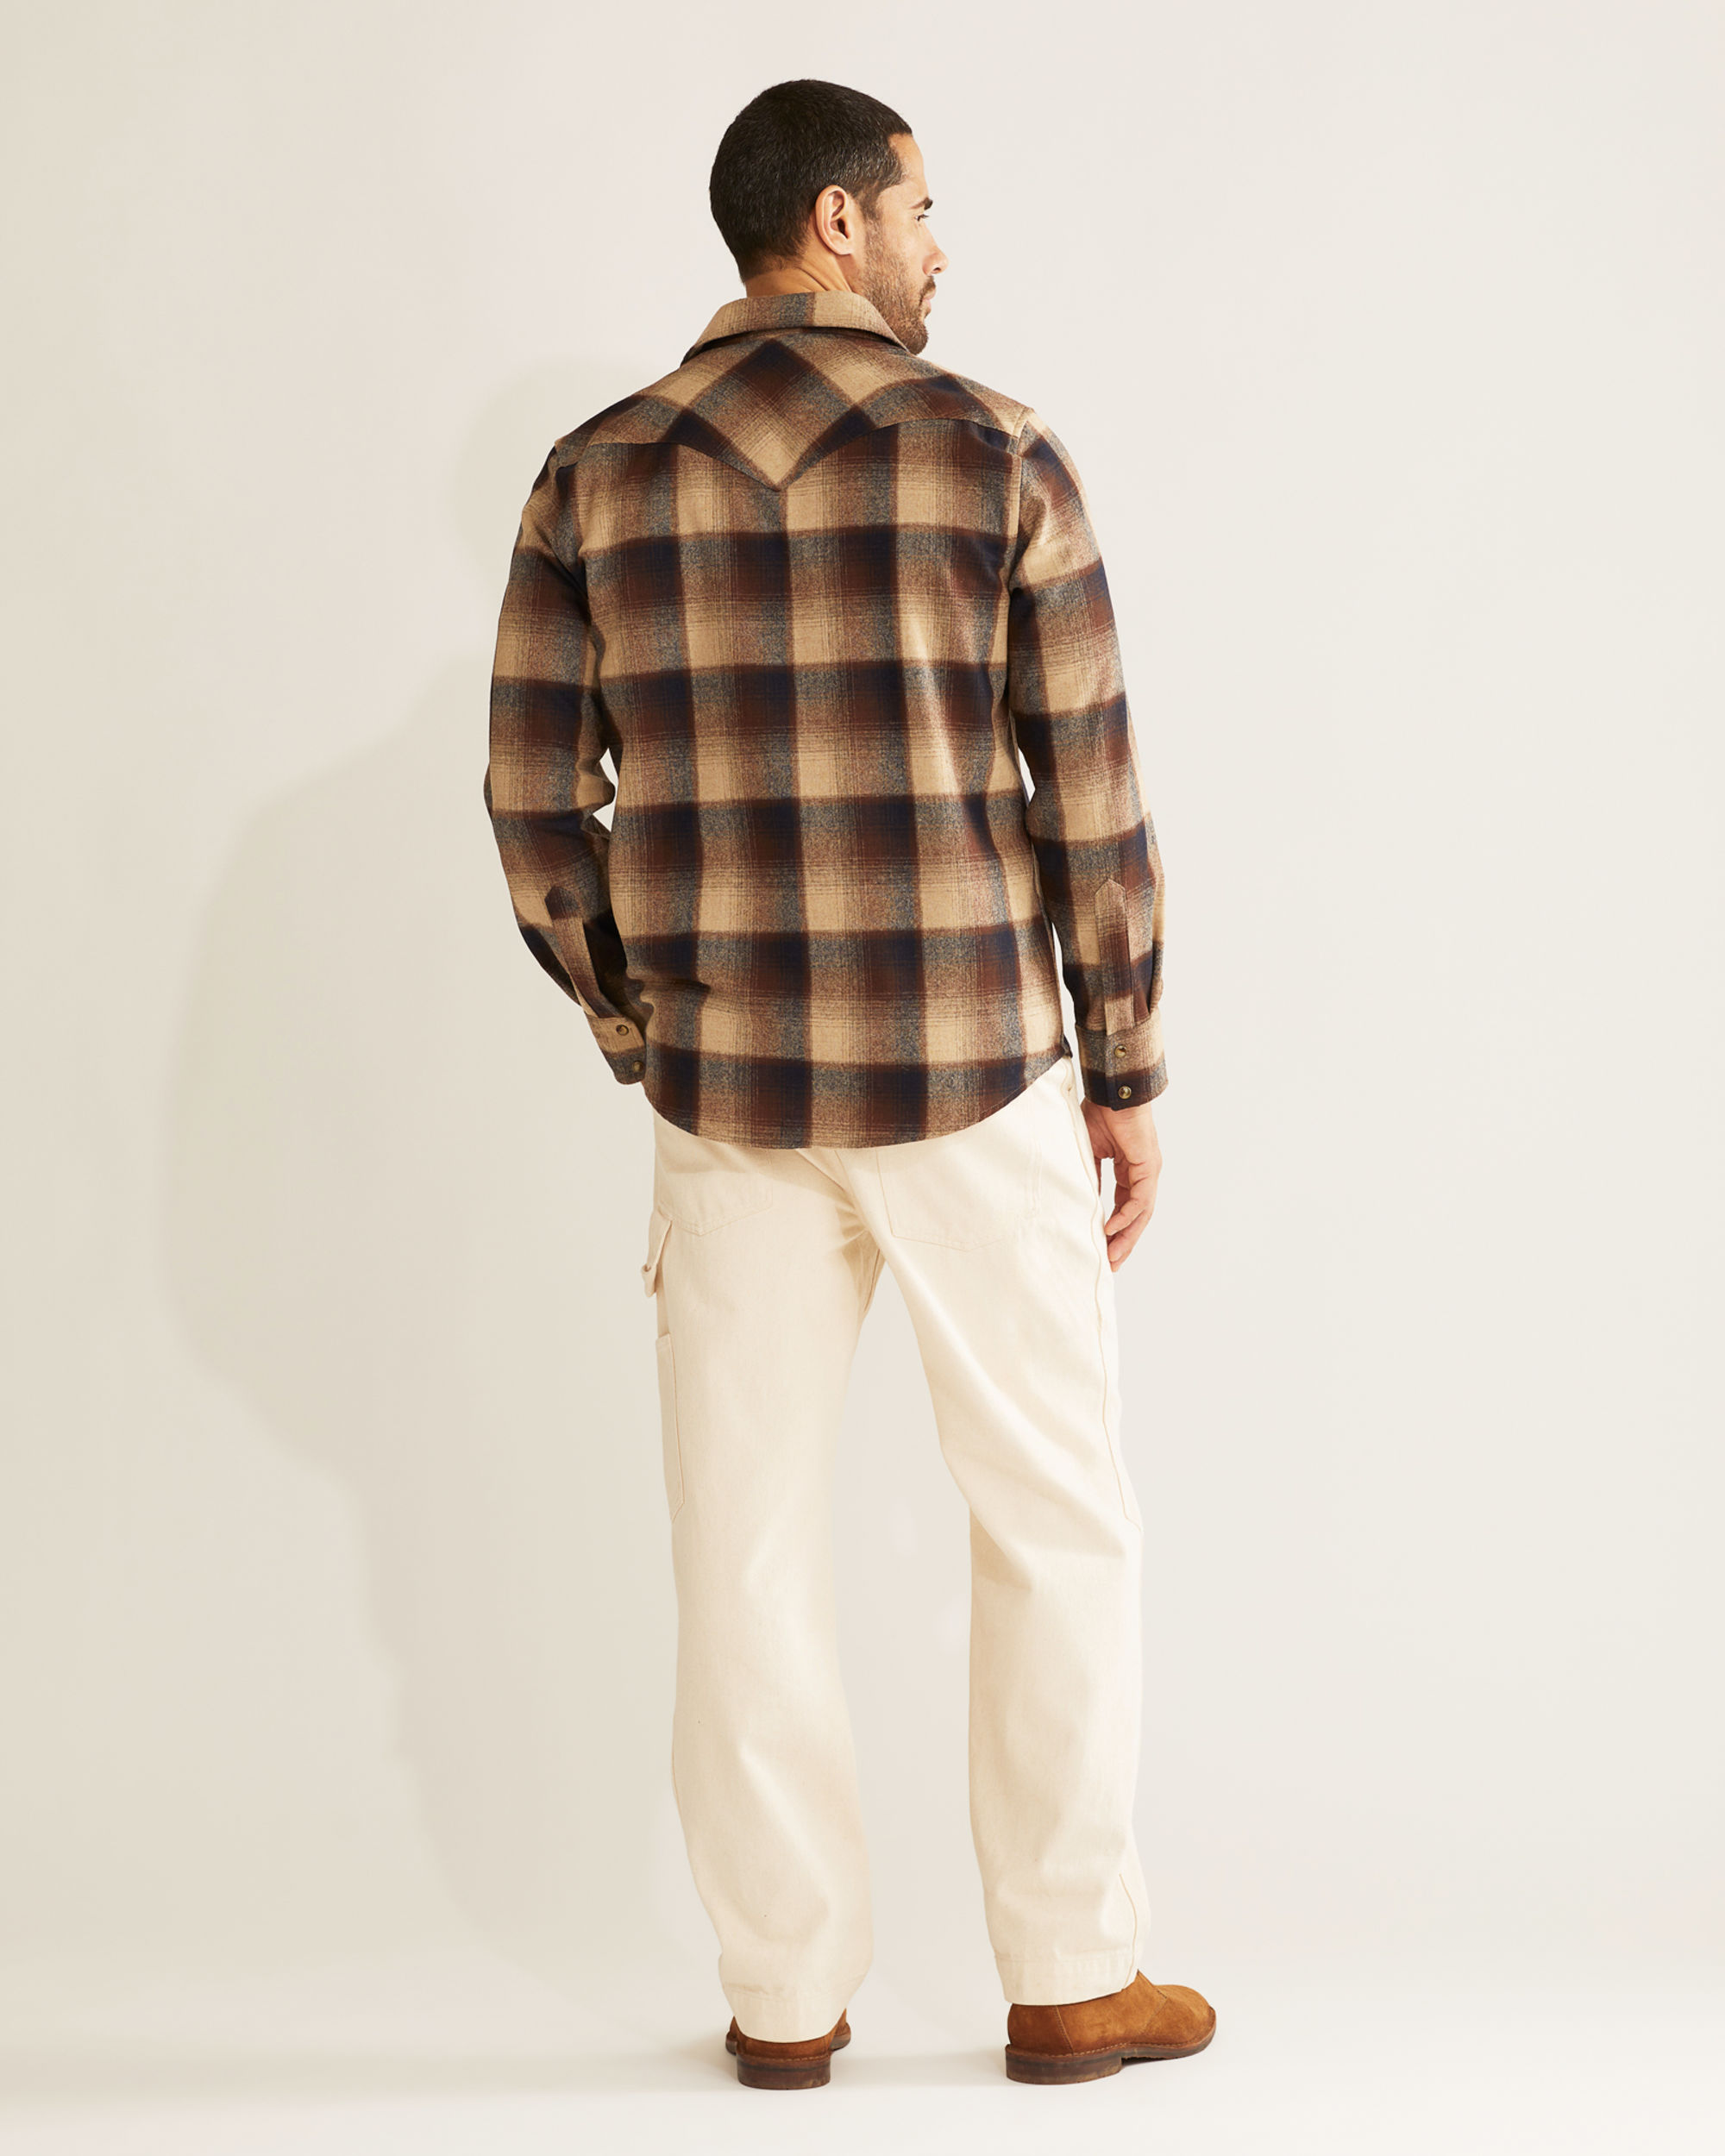 Men's casual outfits wear blue jeans with red plaid shirt, brown